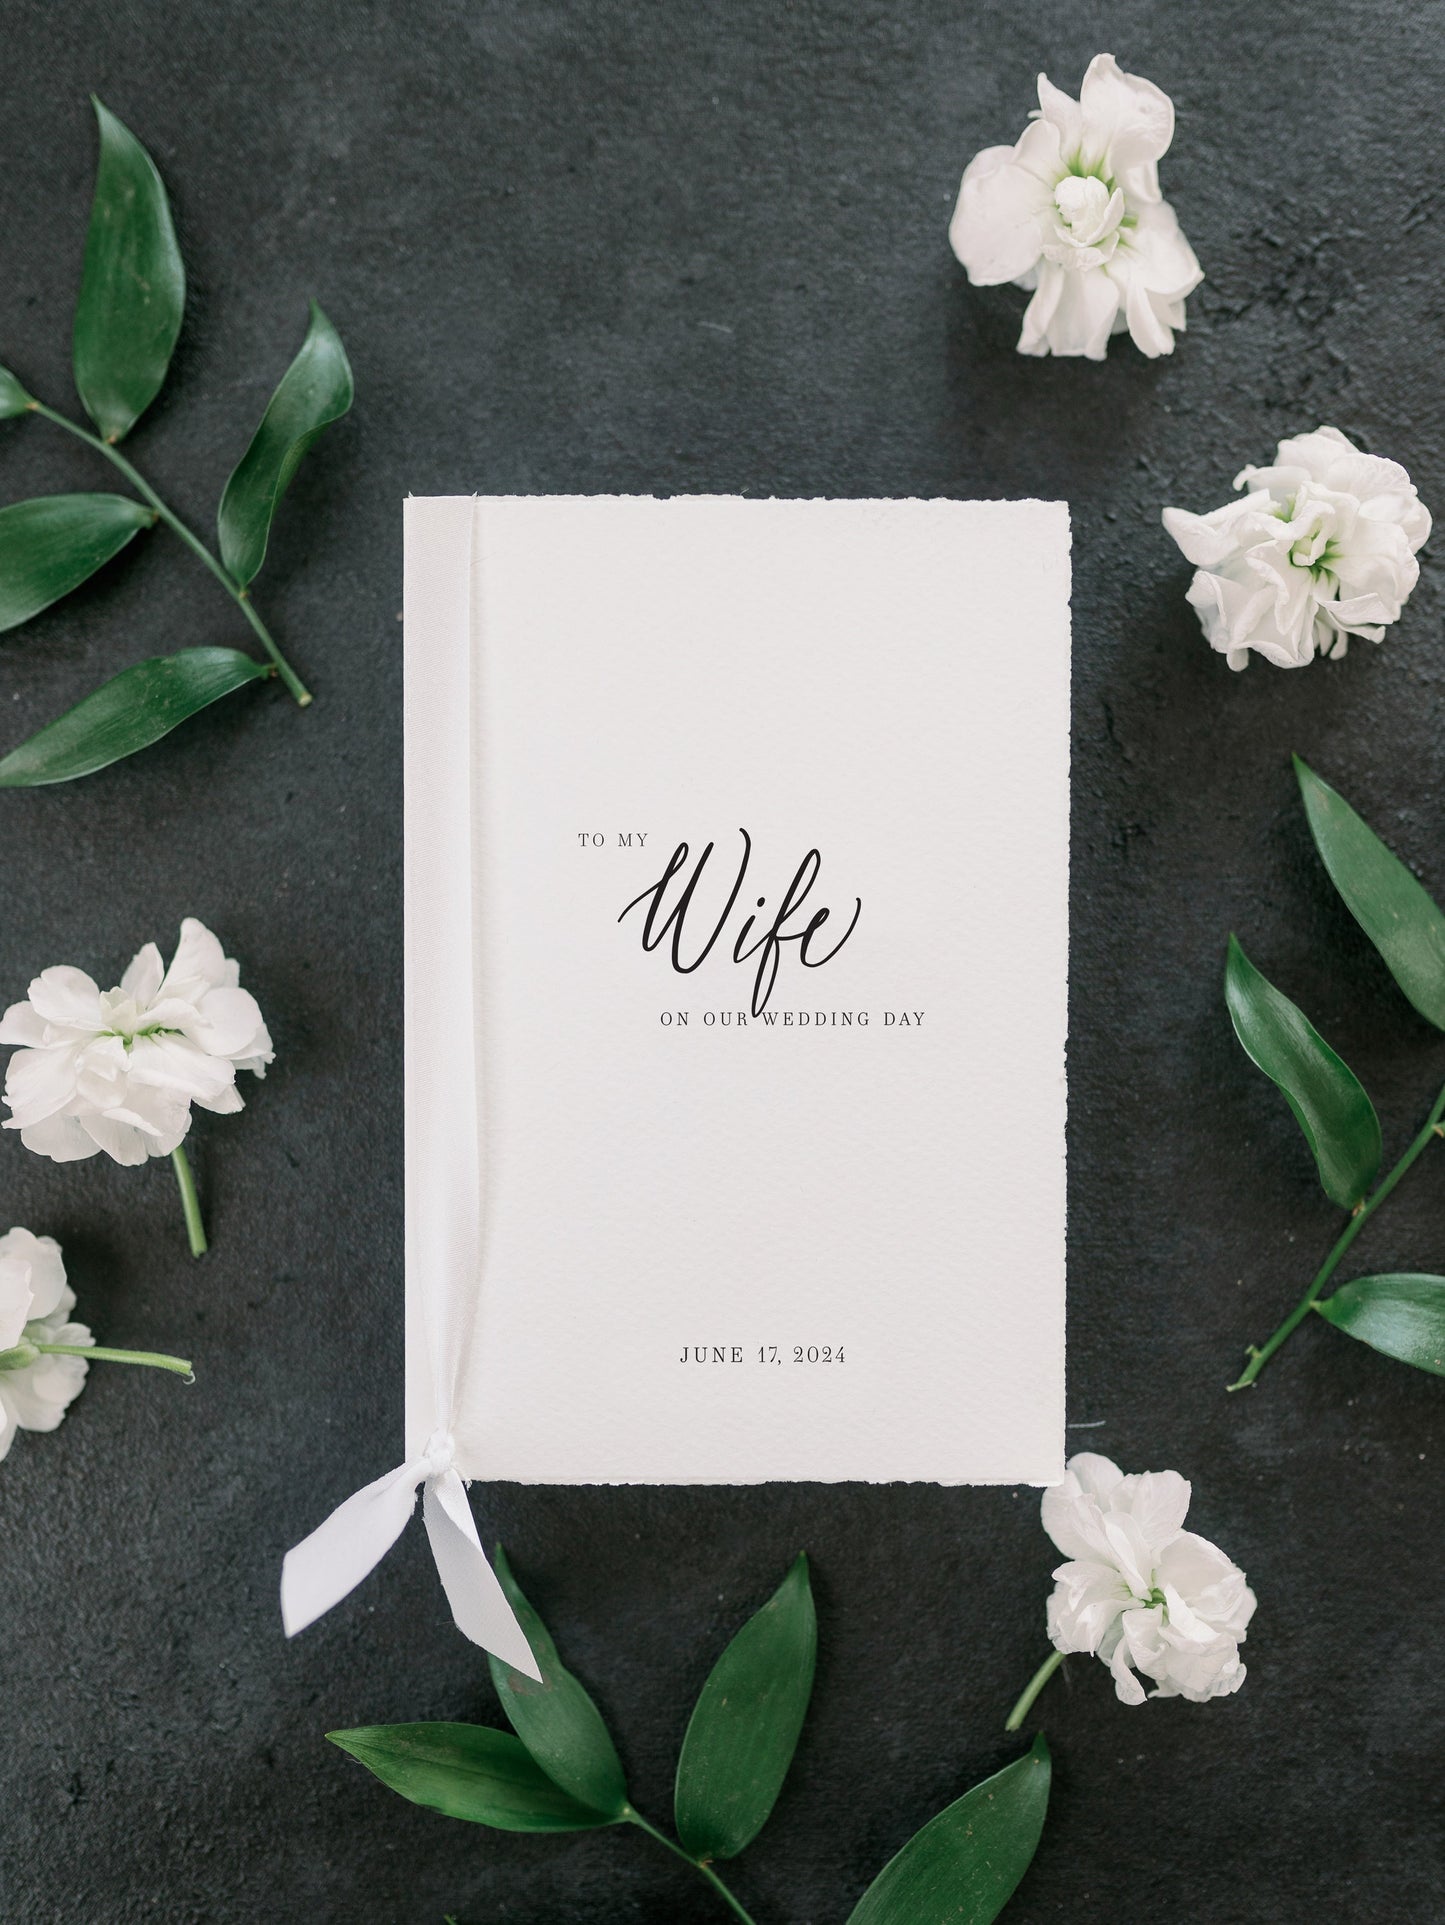 To My Wife on Our Wedding Day Card and Vow Book